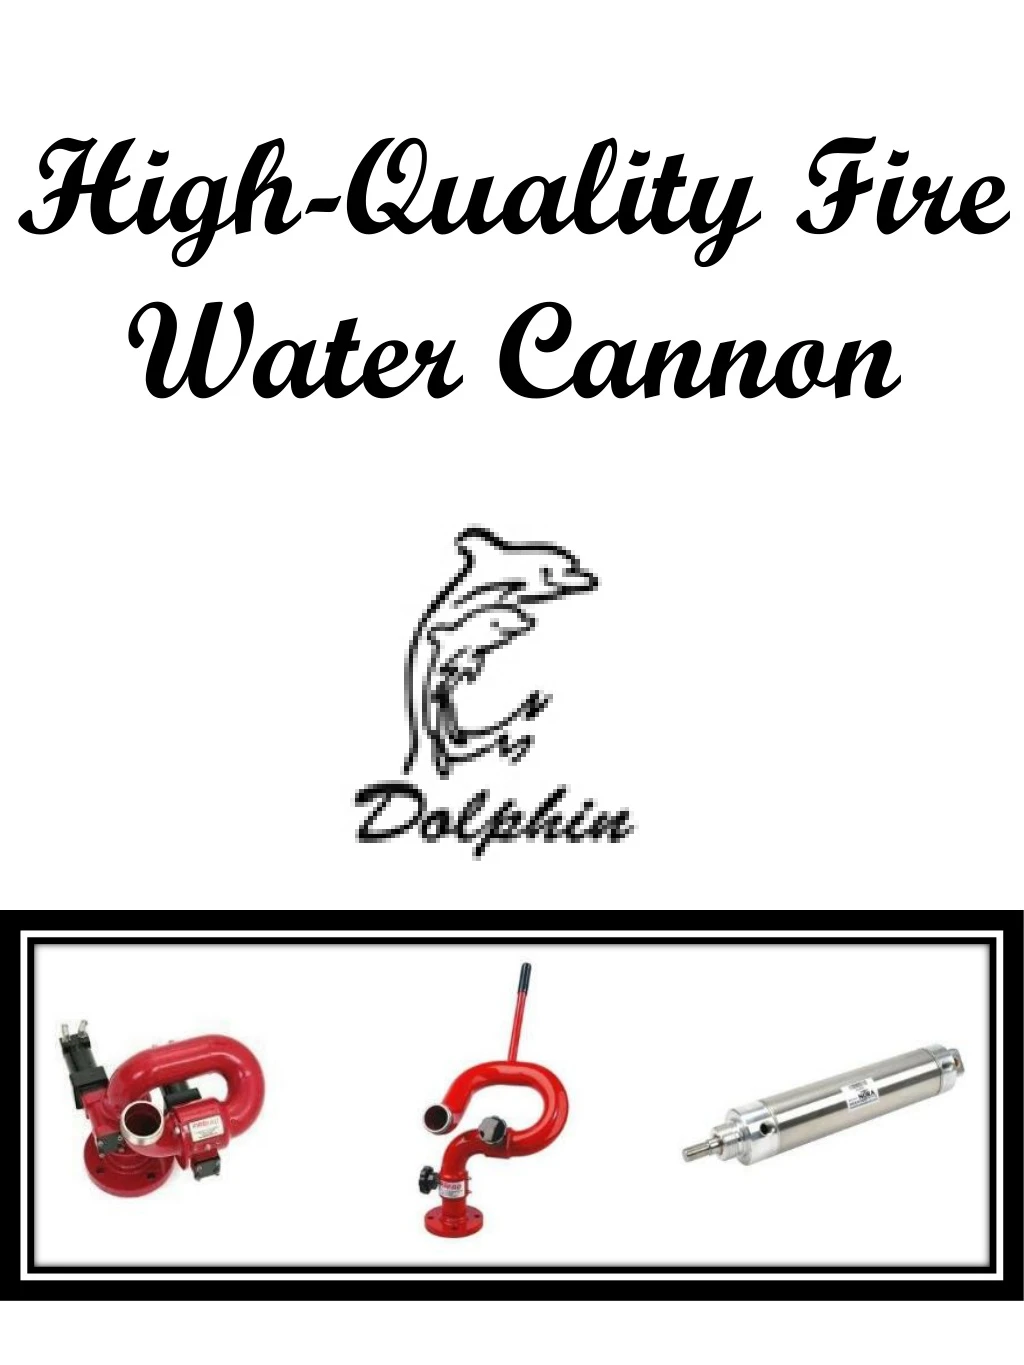 high quality fire water cannon